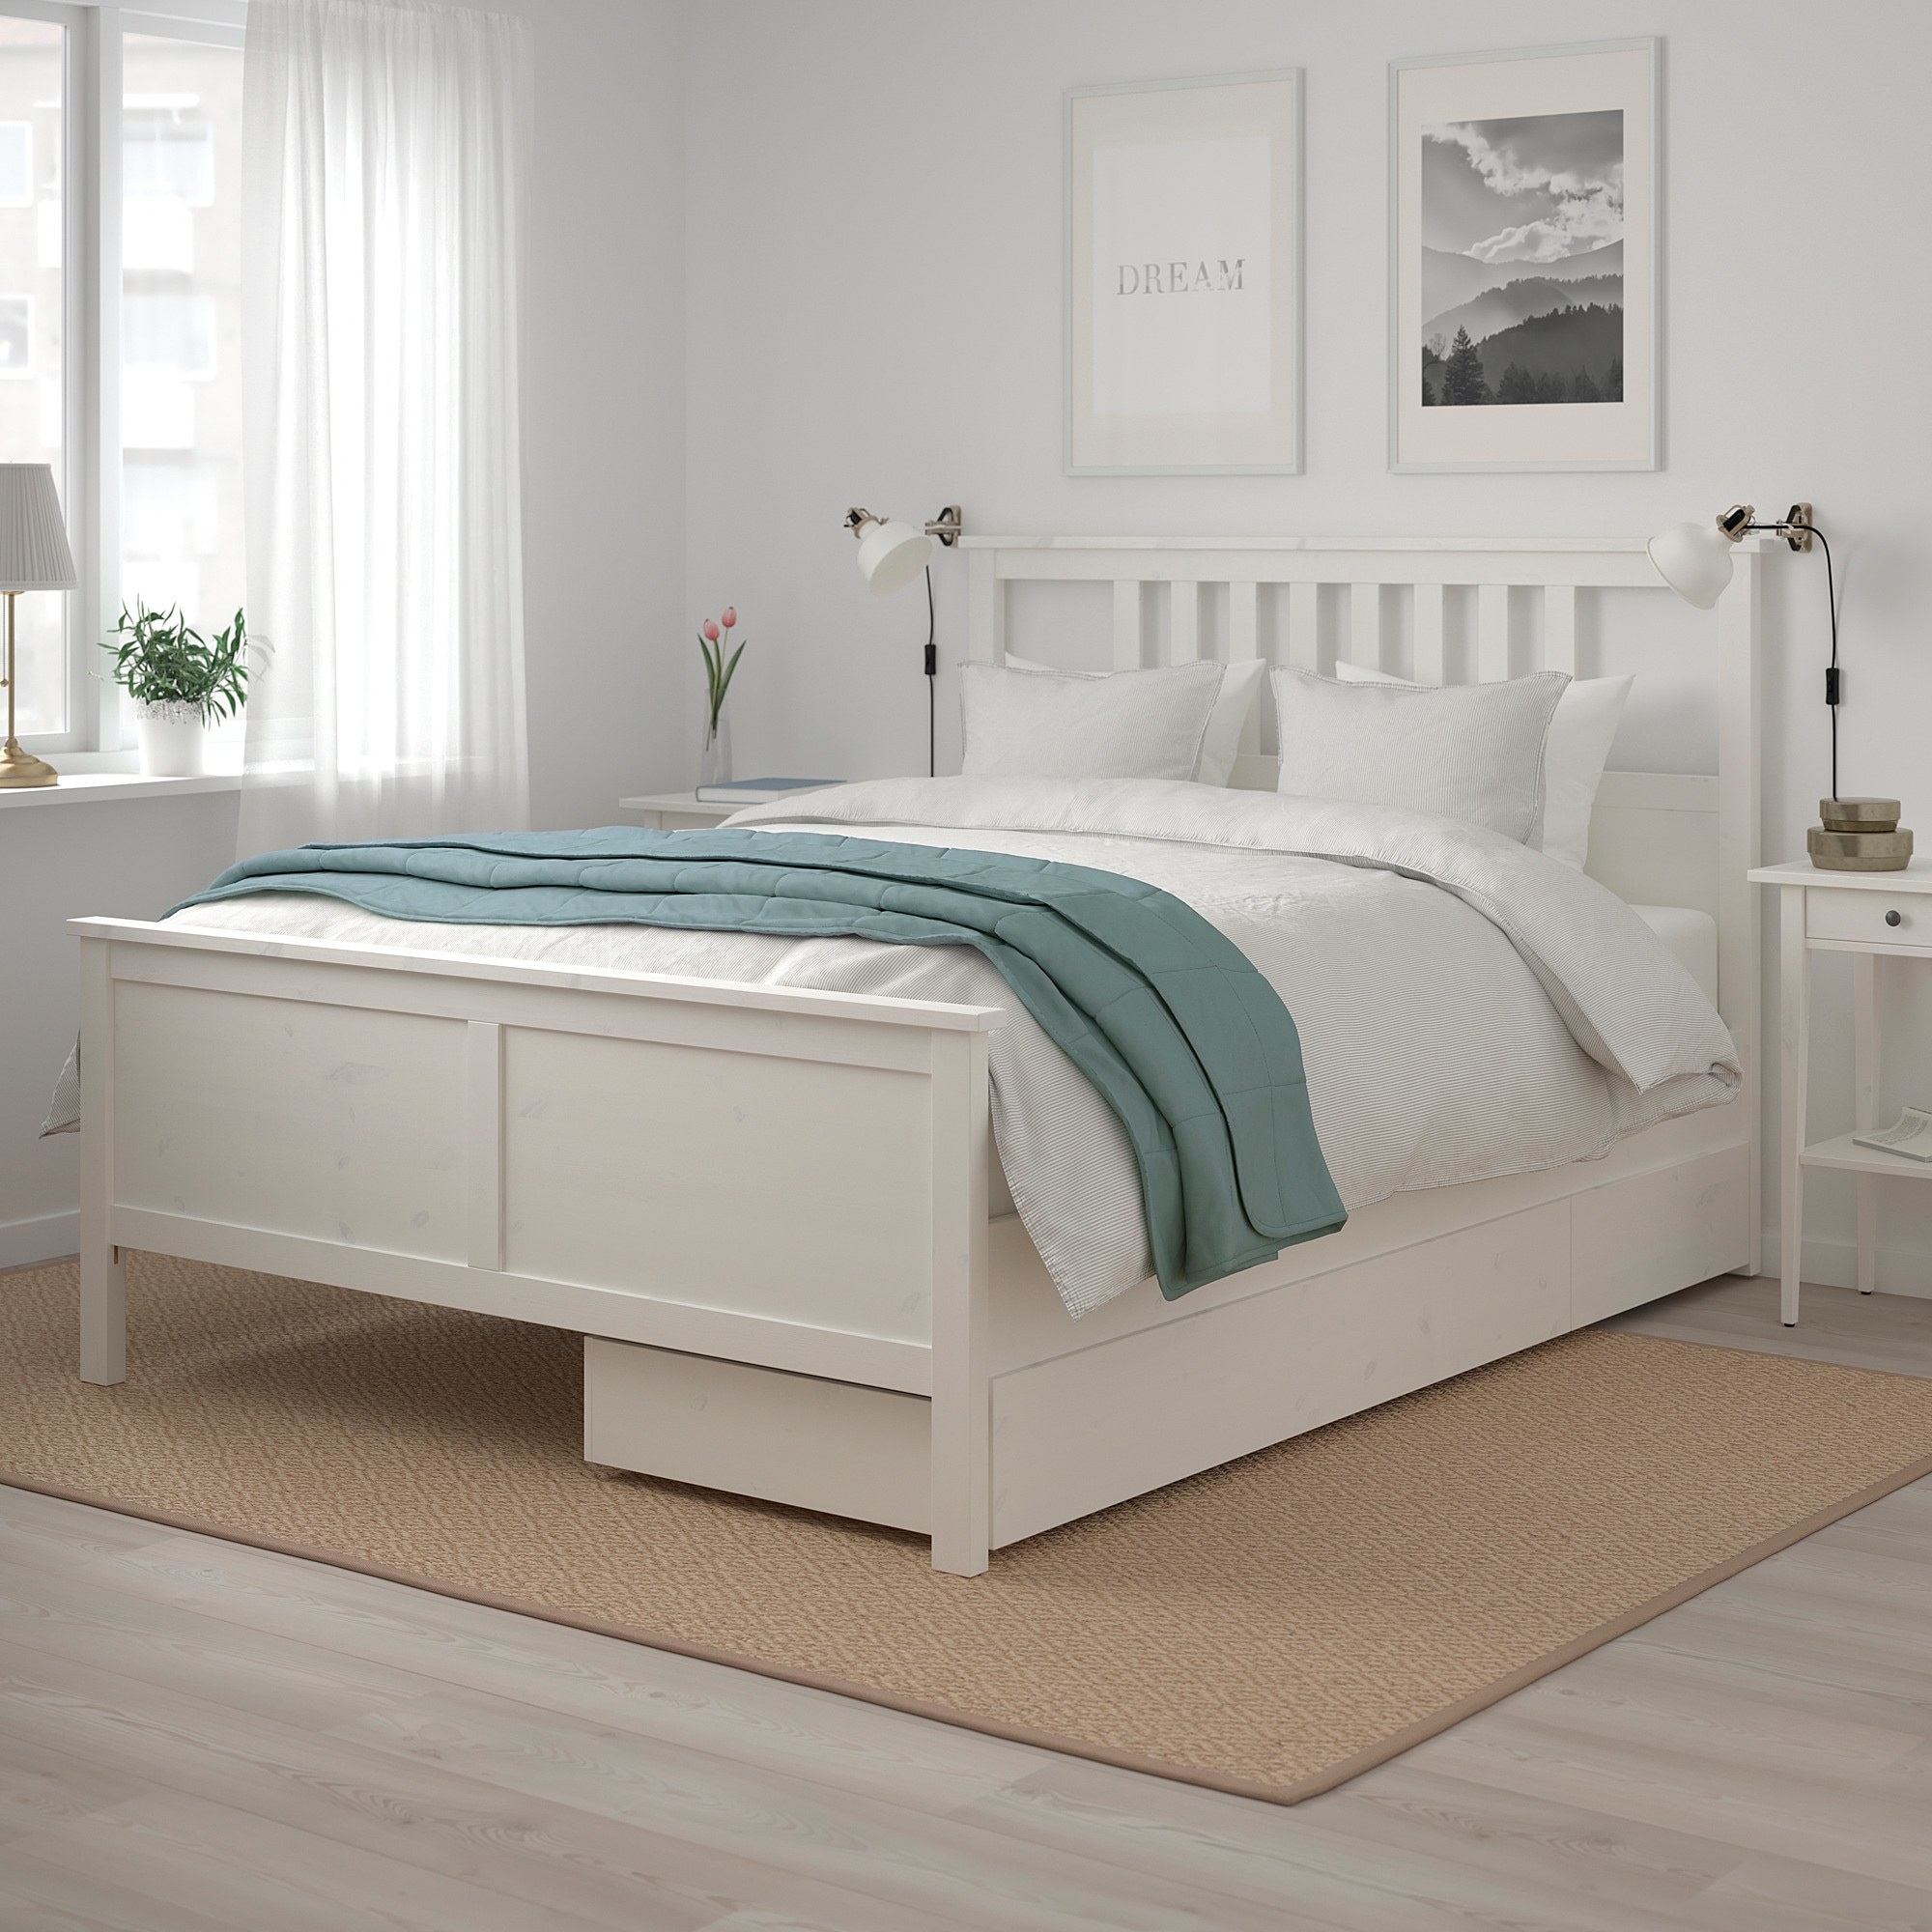 27 Bed Frames That Only Look, Ikea King Bed Frame Canada